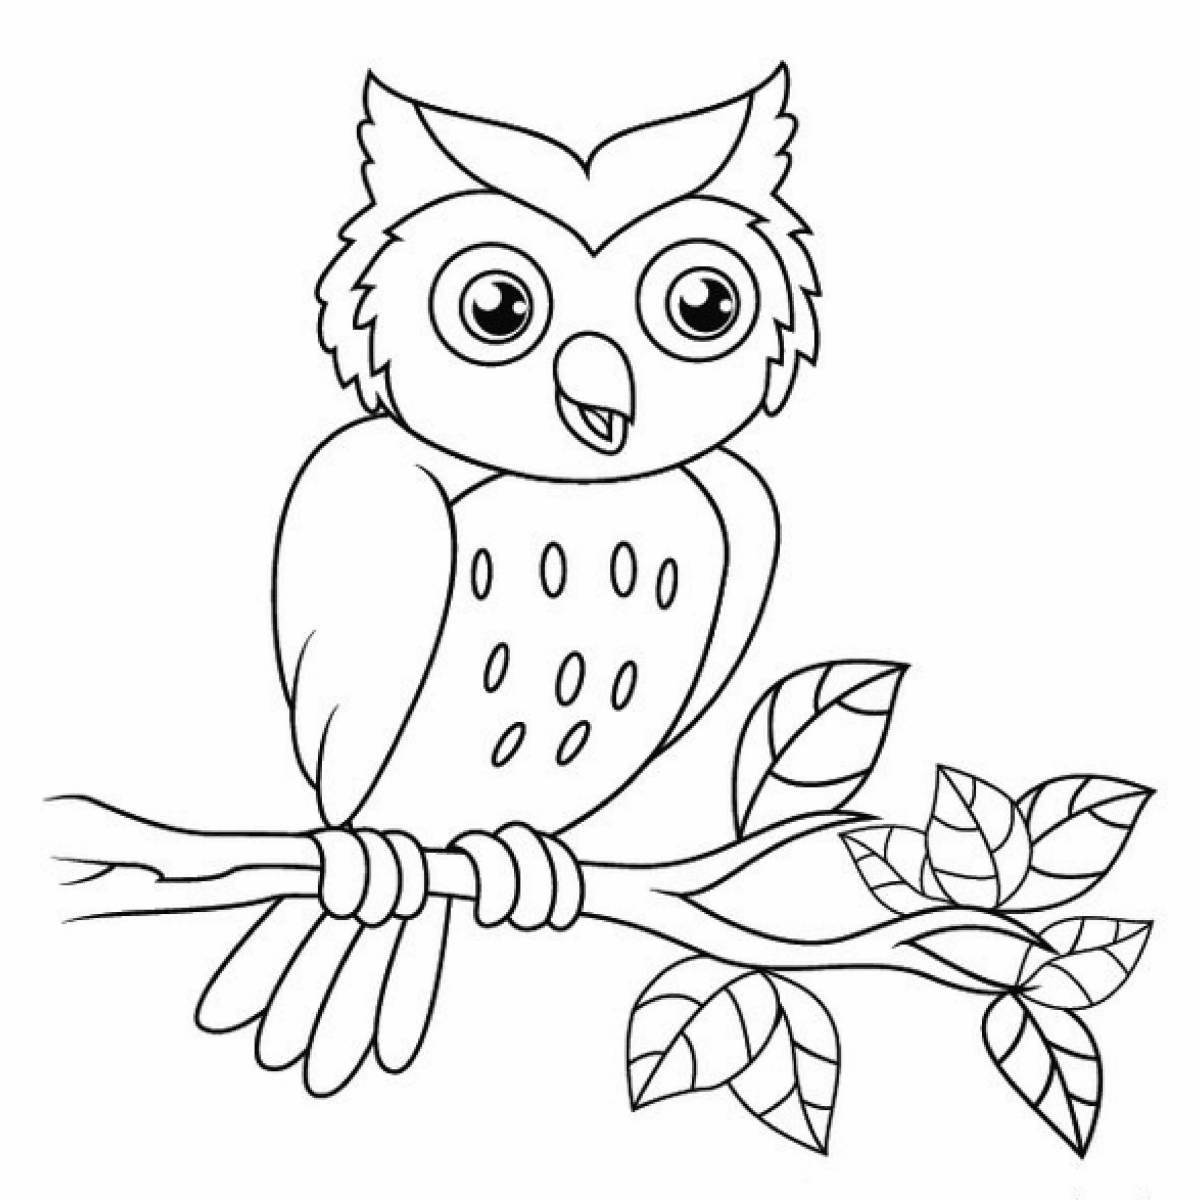 Awesome owl coloring pages for kids